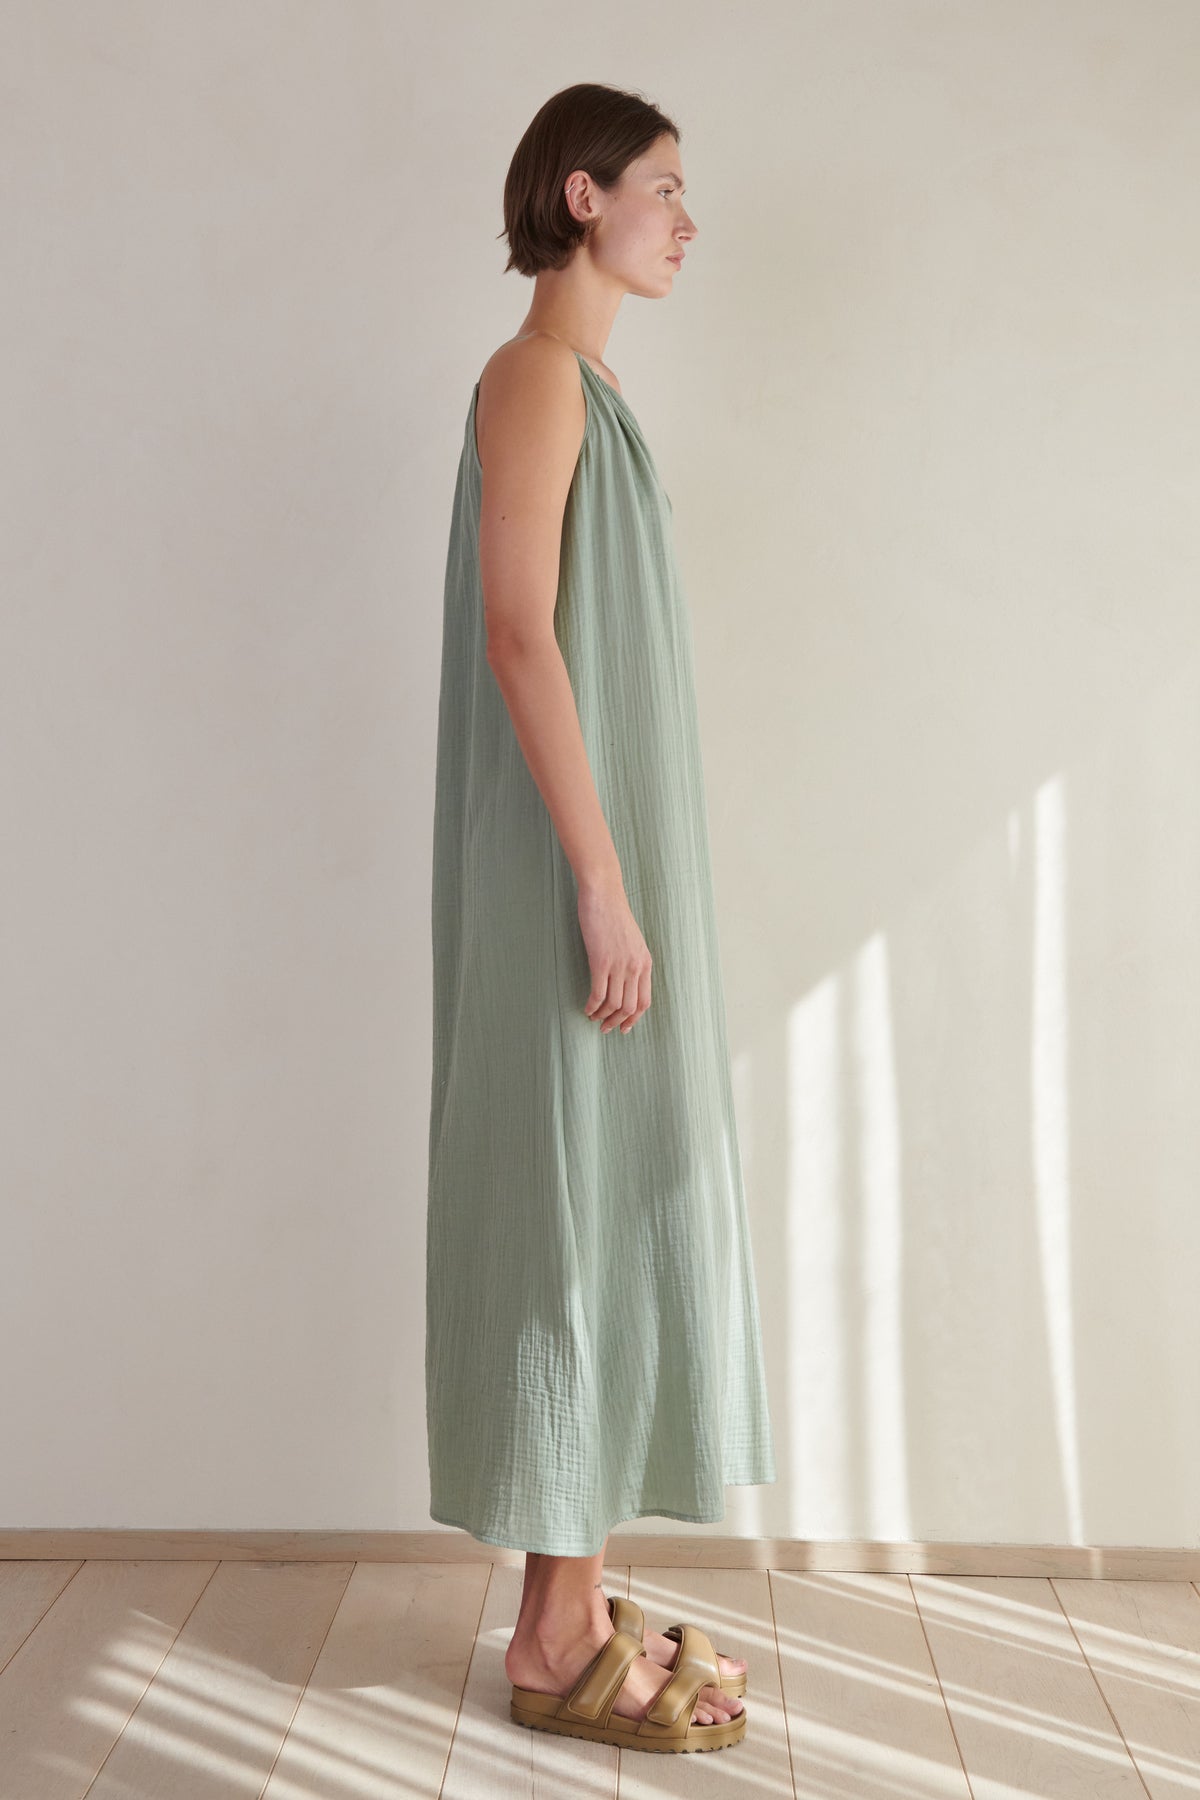 A woman stands in a sunlit room wearing a sleeveless, long green Velvet by Jenny Graham Carrillo dress with a V-neckline and beige platform sandals, looking to her left with a serene expression.-26293219885249